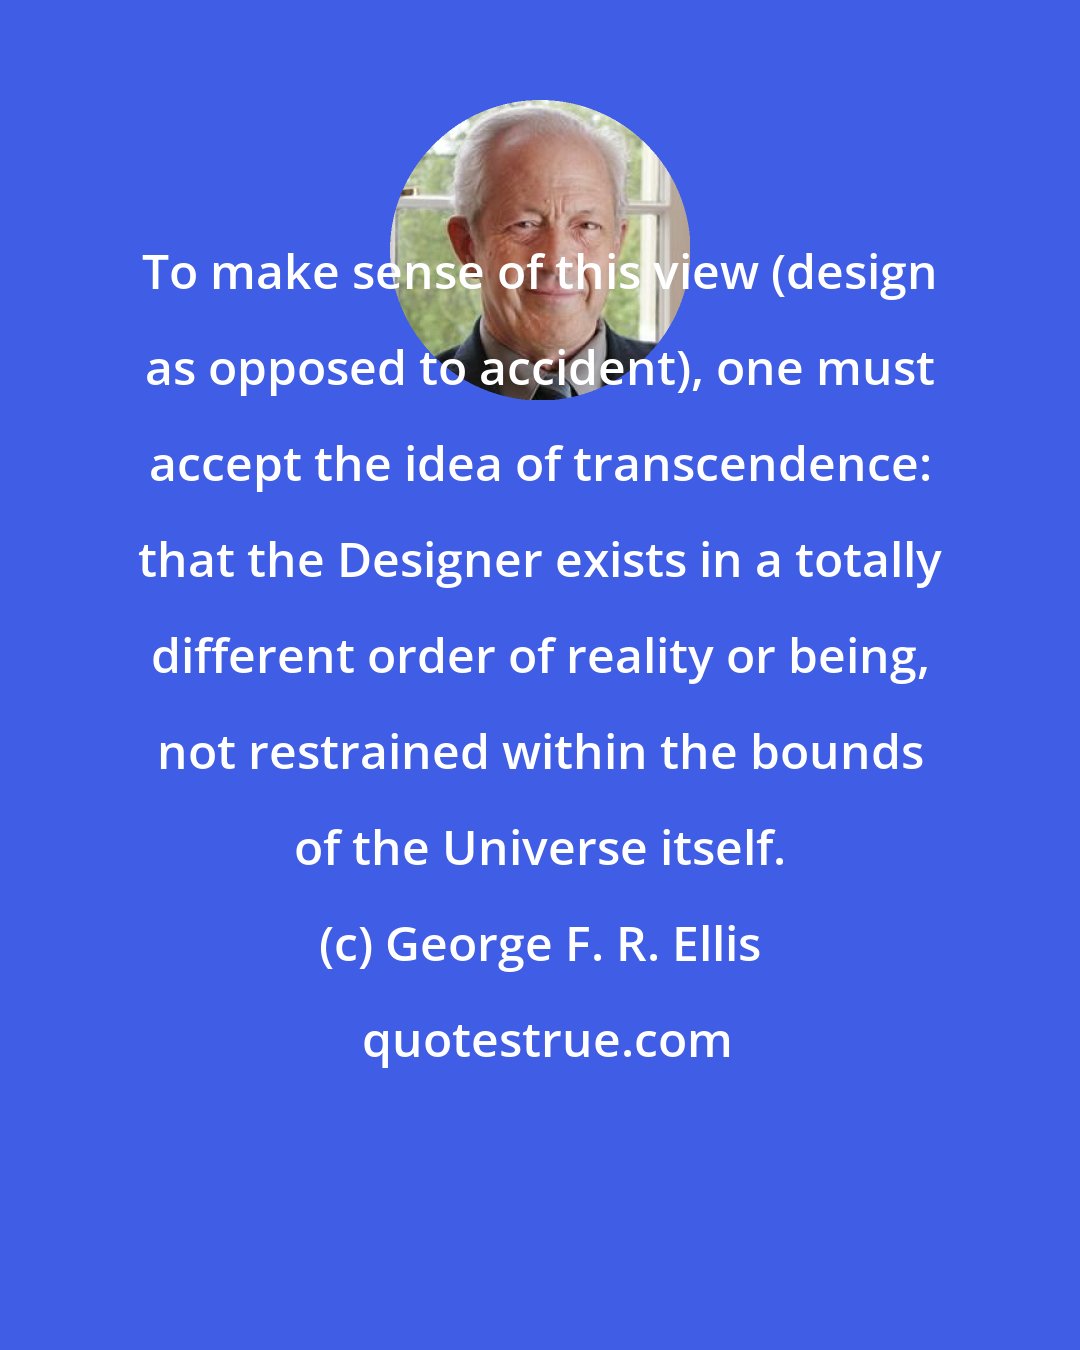 George F. R. Ellis: To make sense of this view (design as opposed to accident), one must accept the idea of transcendence: that the Designer exists in a totally different order of reality or being, not restrained within the bounds of the Universe itself.